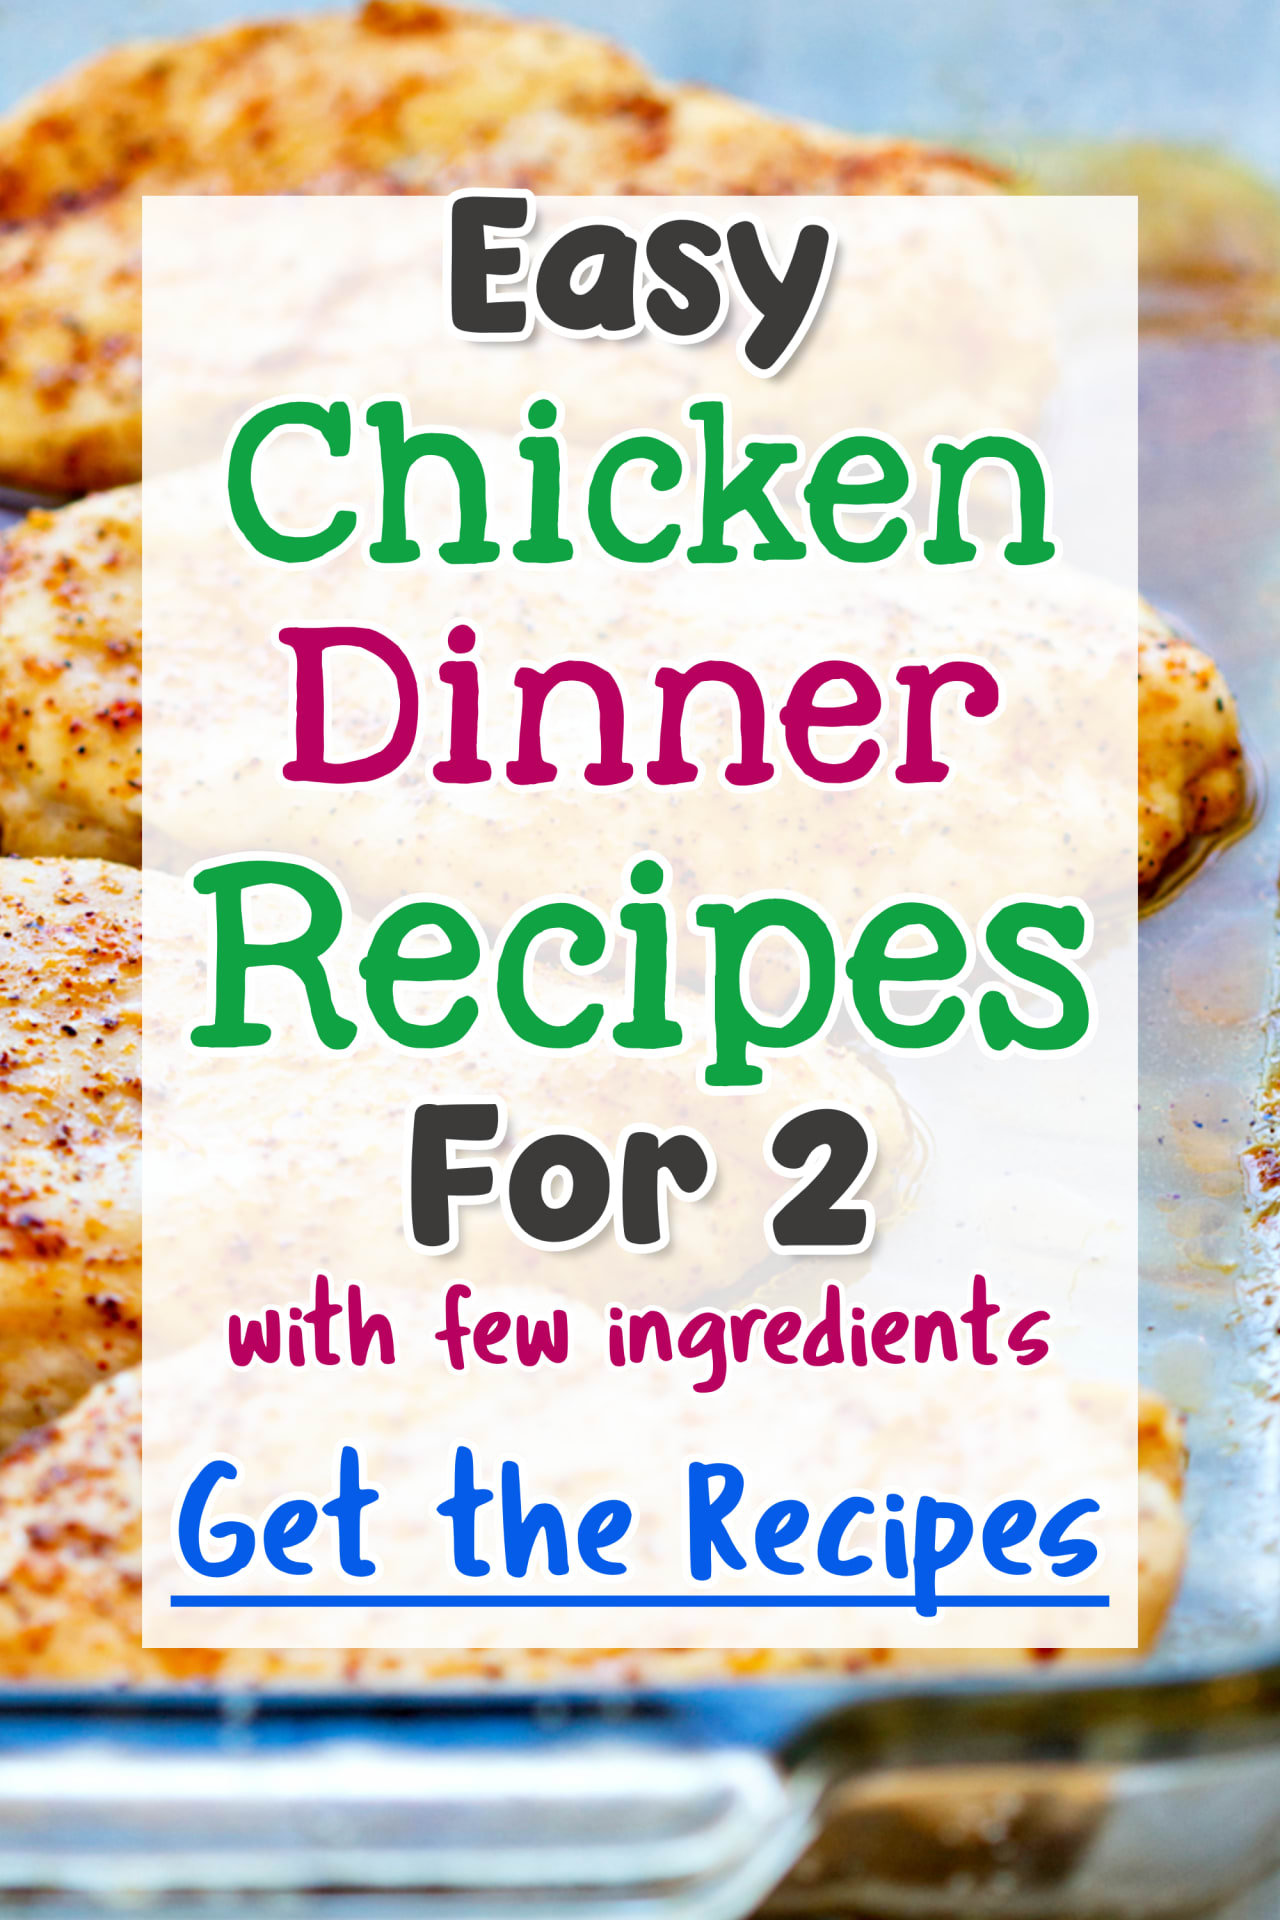 Easy Chicken Dinner Recipes For Two with few ingredients - simple chicken recipes for dinner tonight for 2 people.  Frugal chicken recipes for cooking on a budget...